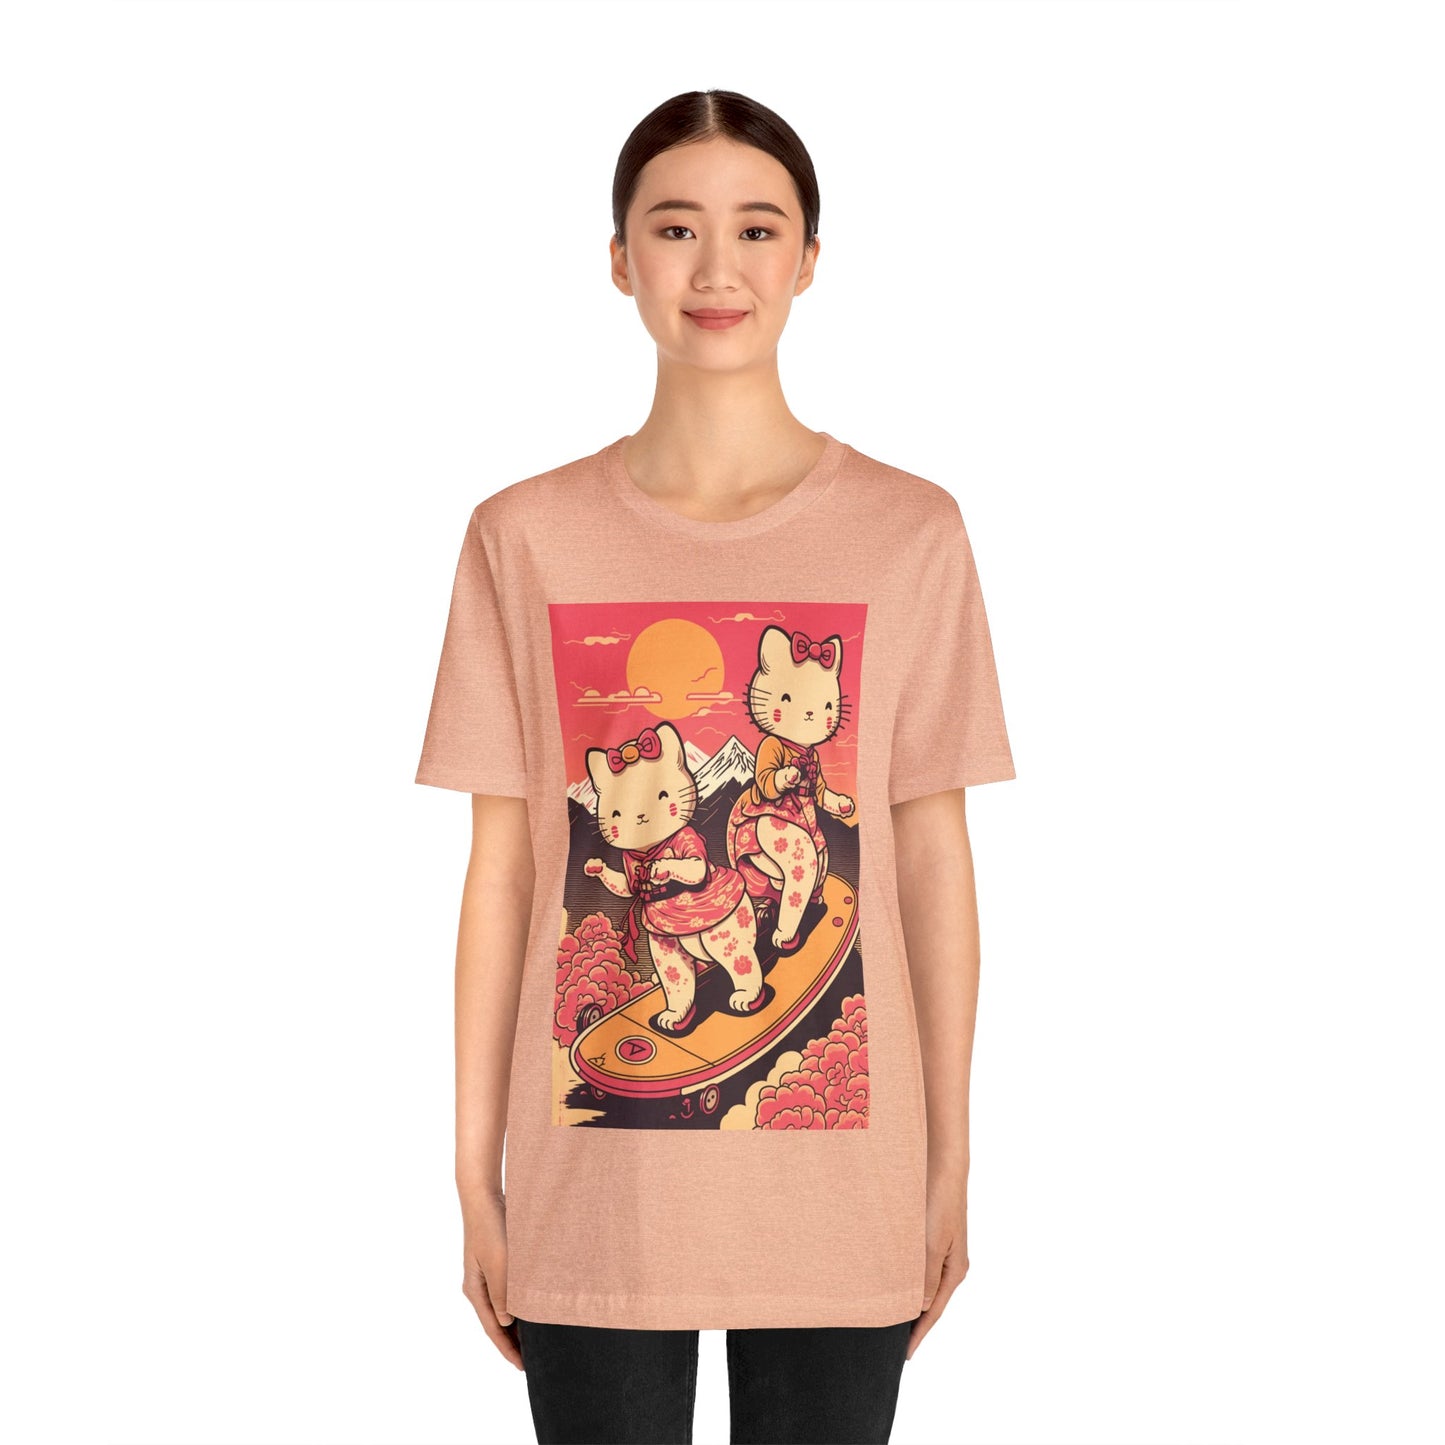 Cute Japanese Anime Kittens/Cats Skating by Mount Fuji | Ukiyo-E Style | Various Sizes Unisex Cotton Jersey Short Sleeve for Cat Lovers